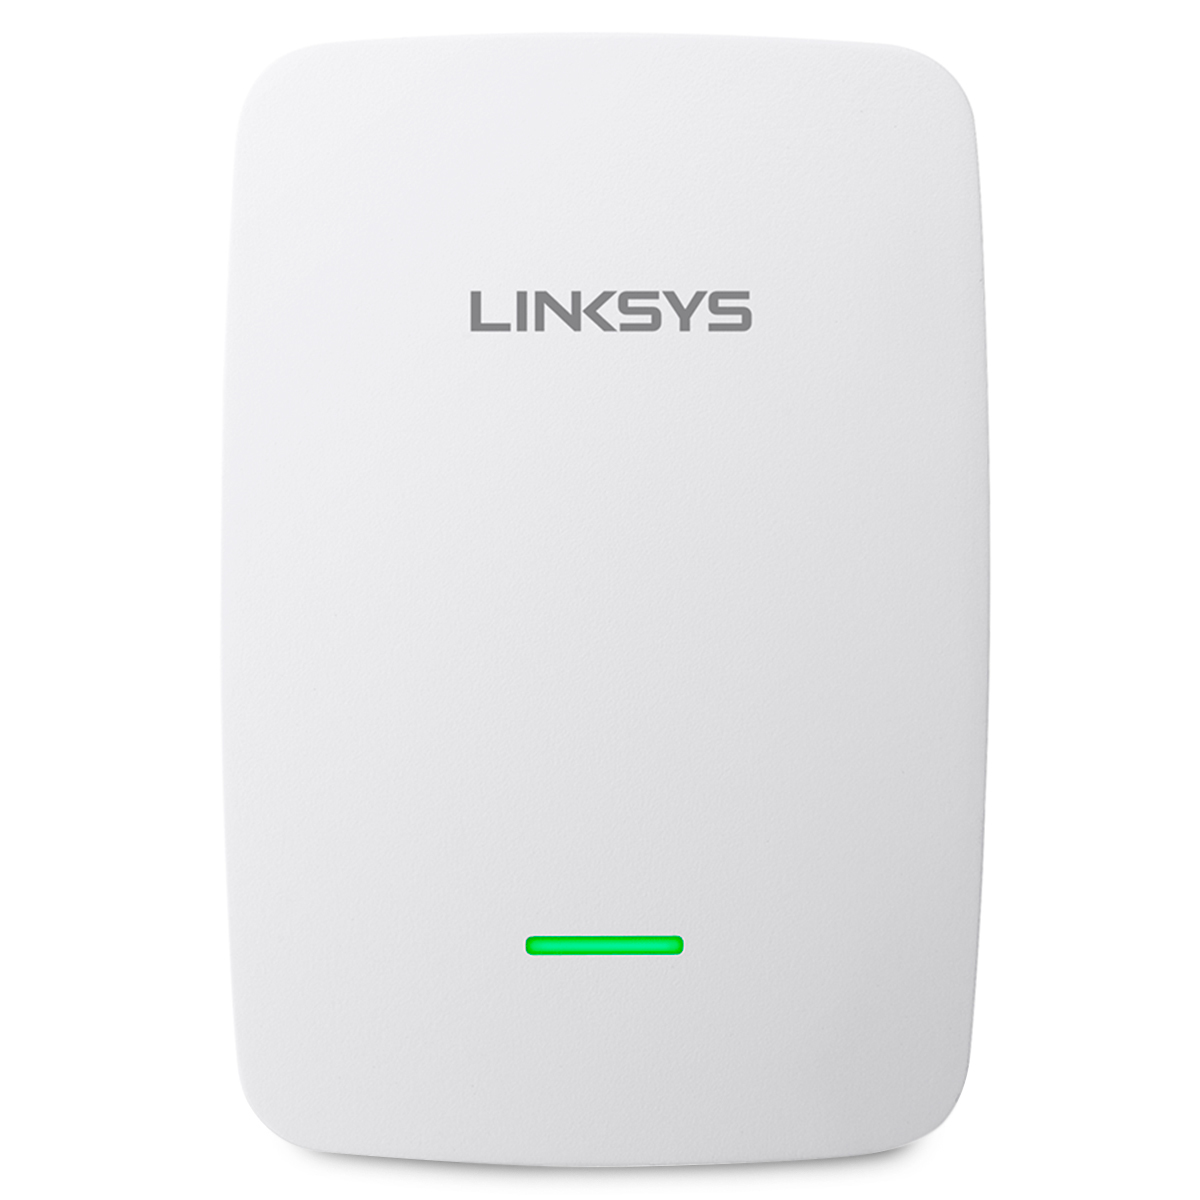 (OPEN BOX) LINKSYS REPETIDOR INALAMBRICO N300 SPOT FINDER(RE3000W)